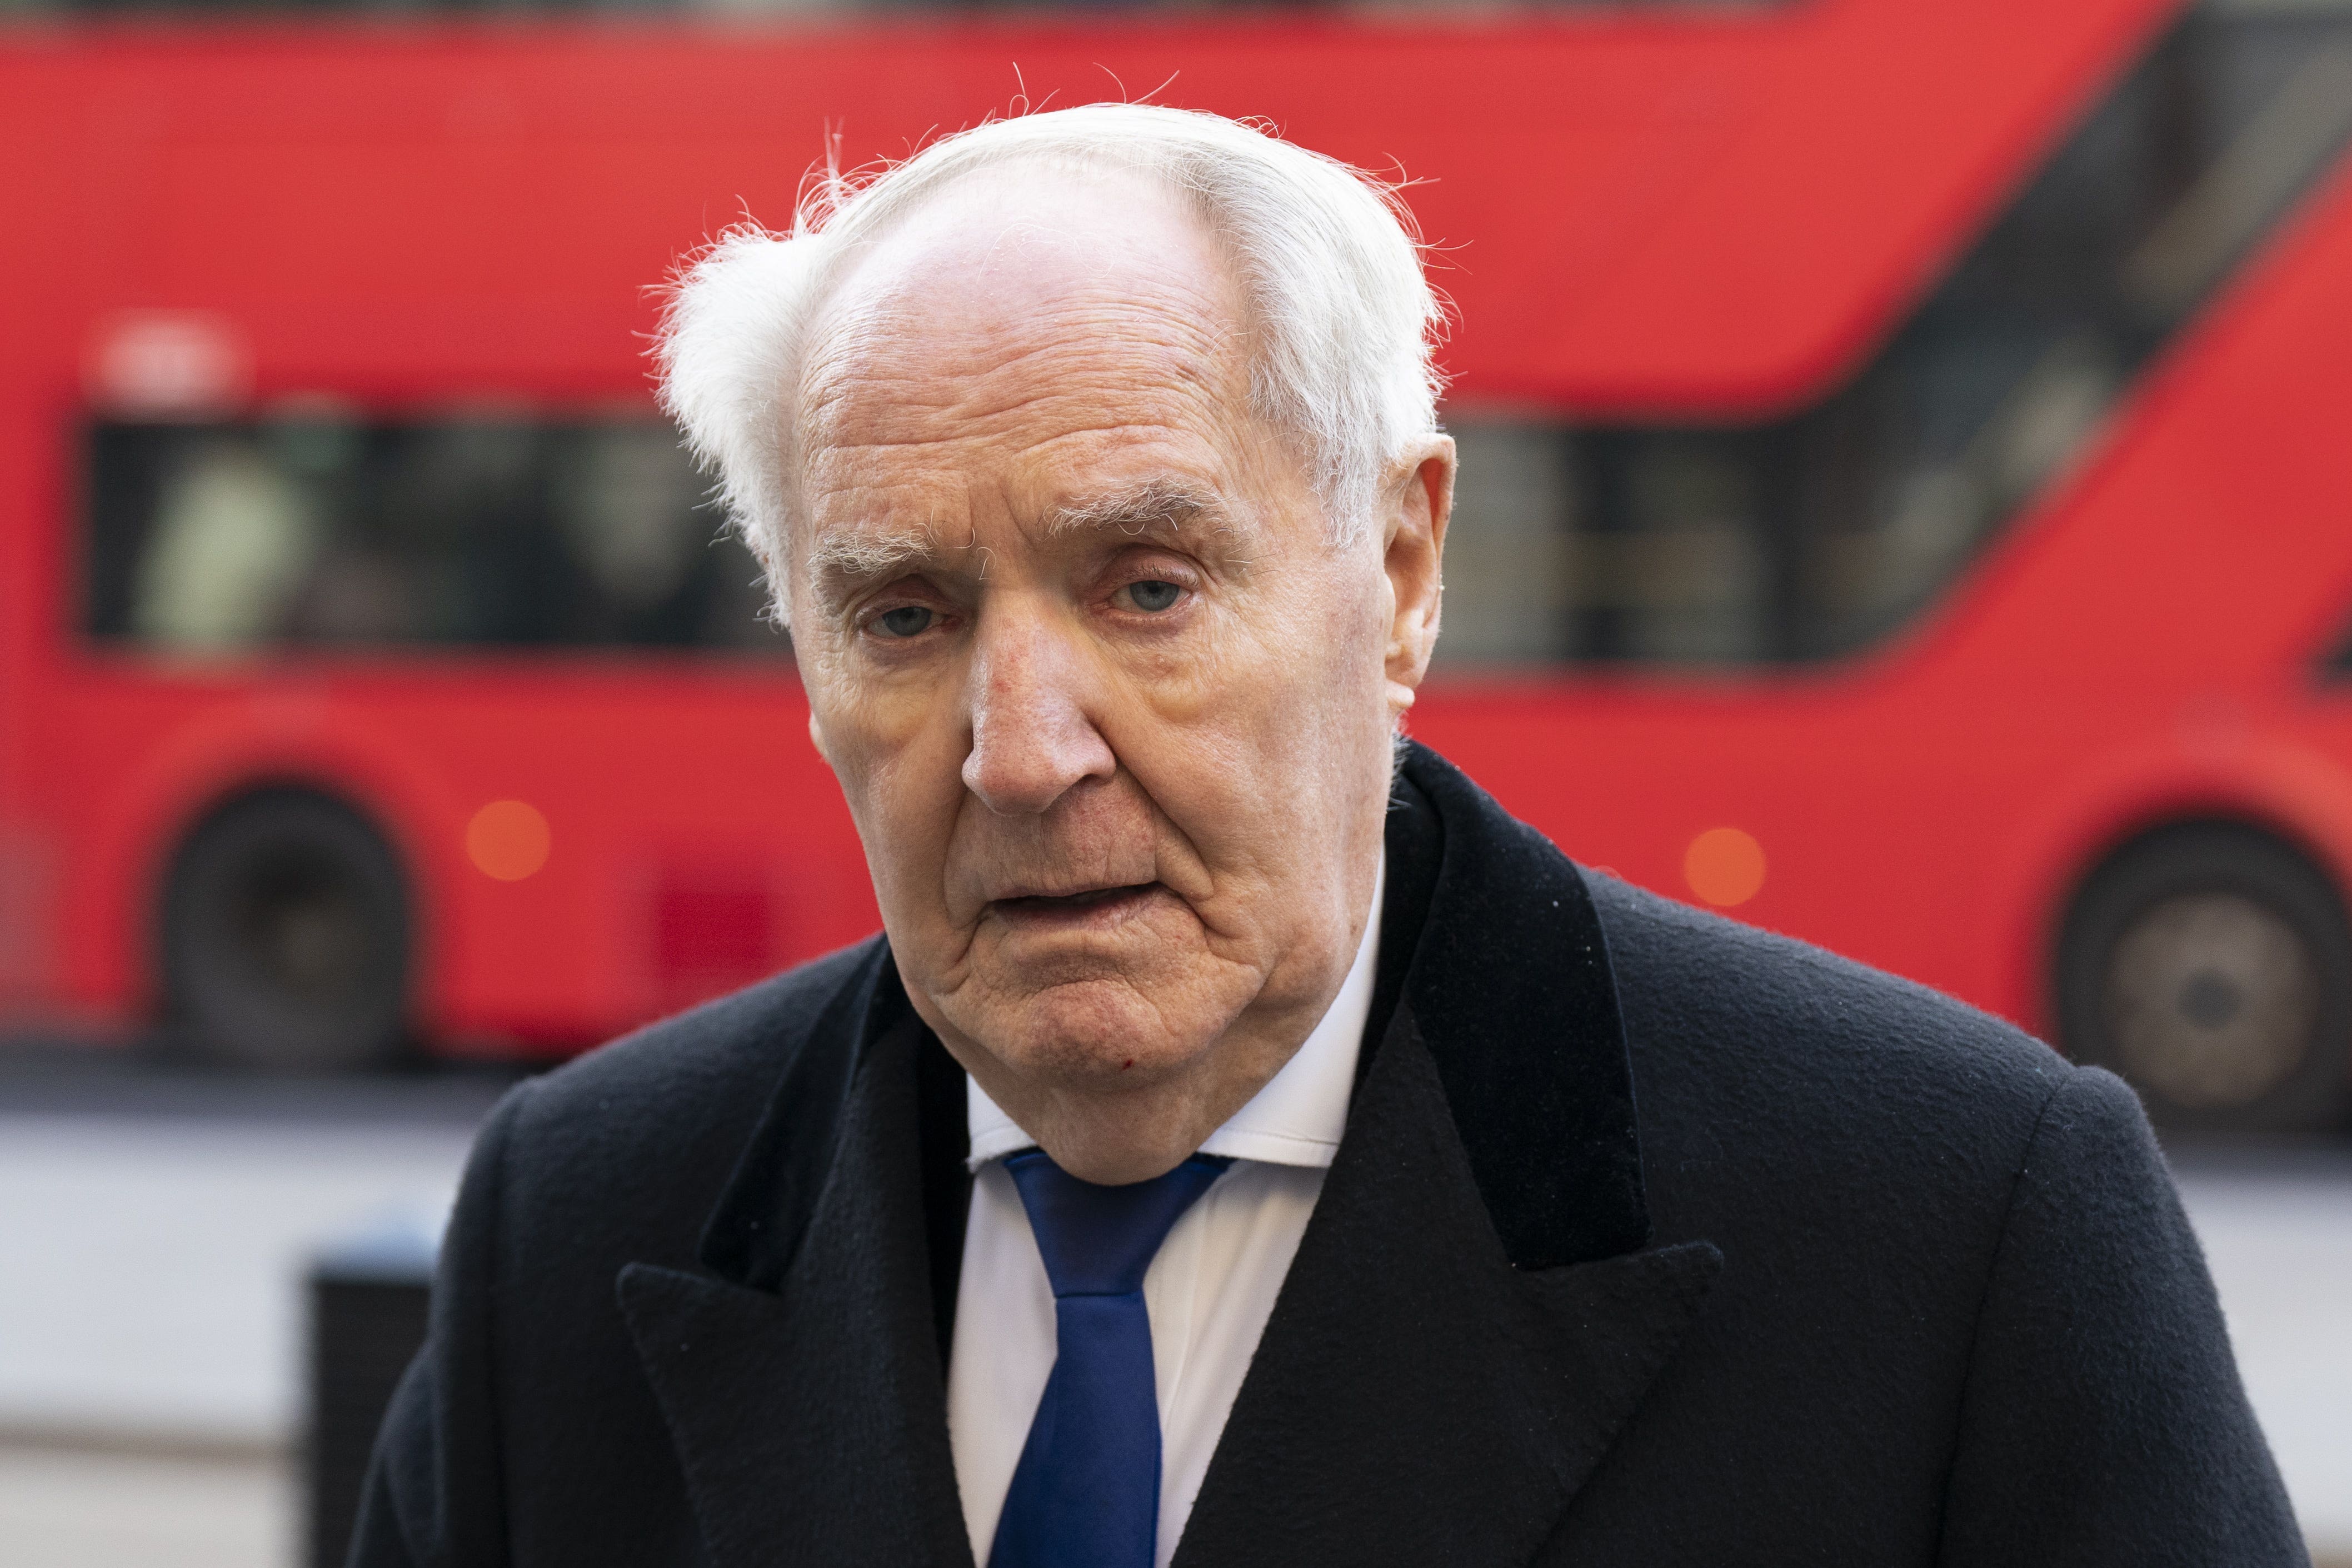 Sir Frederick Barclay is trying to settle a long-running fight with his ex-wife but having difficulties “arranging money”, a judge has heard (Kirsty O’Connor/PA)